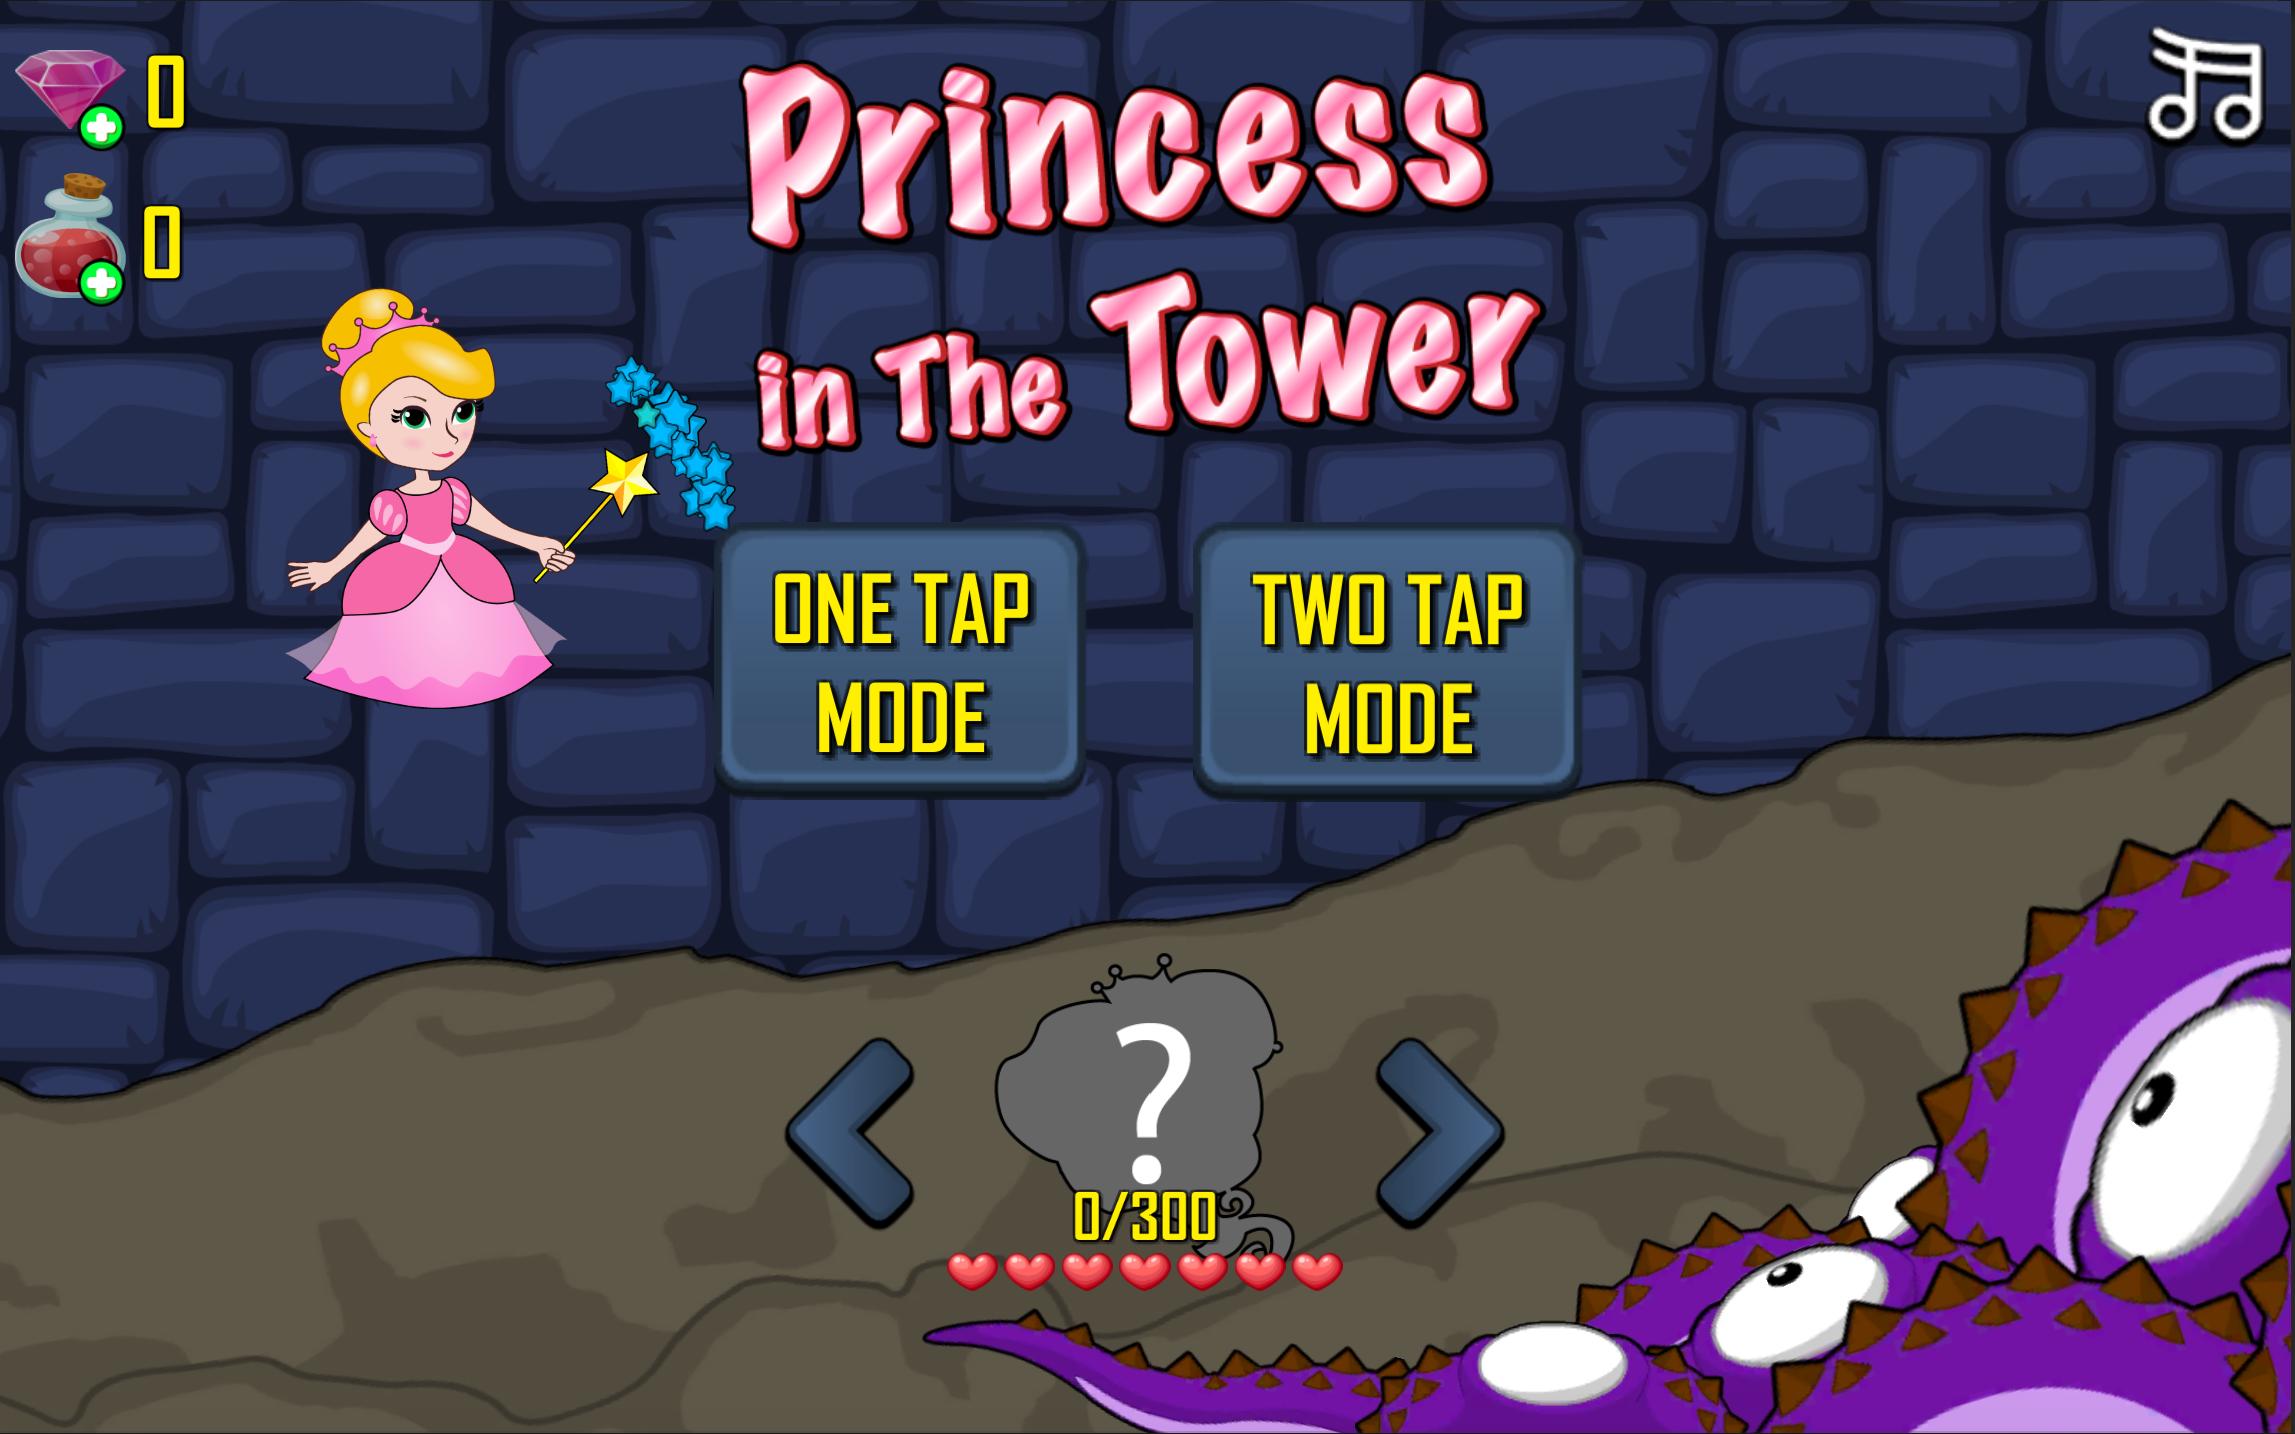 Princess in the tower. Tower Princess игра. Старая игра про принцессу в башне. Принцесса в башне. Принцесса и башня / the Princess and the Tower.